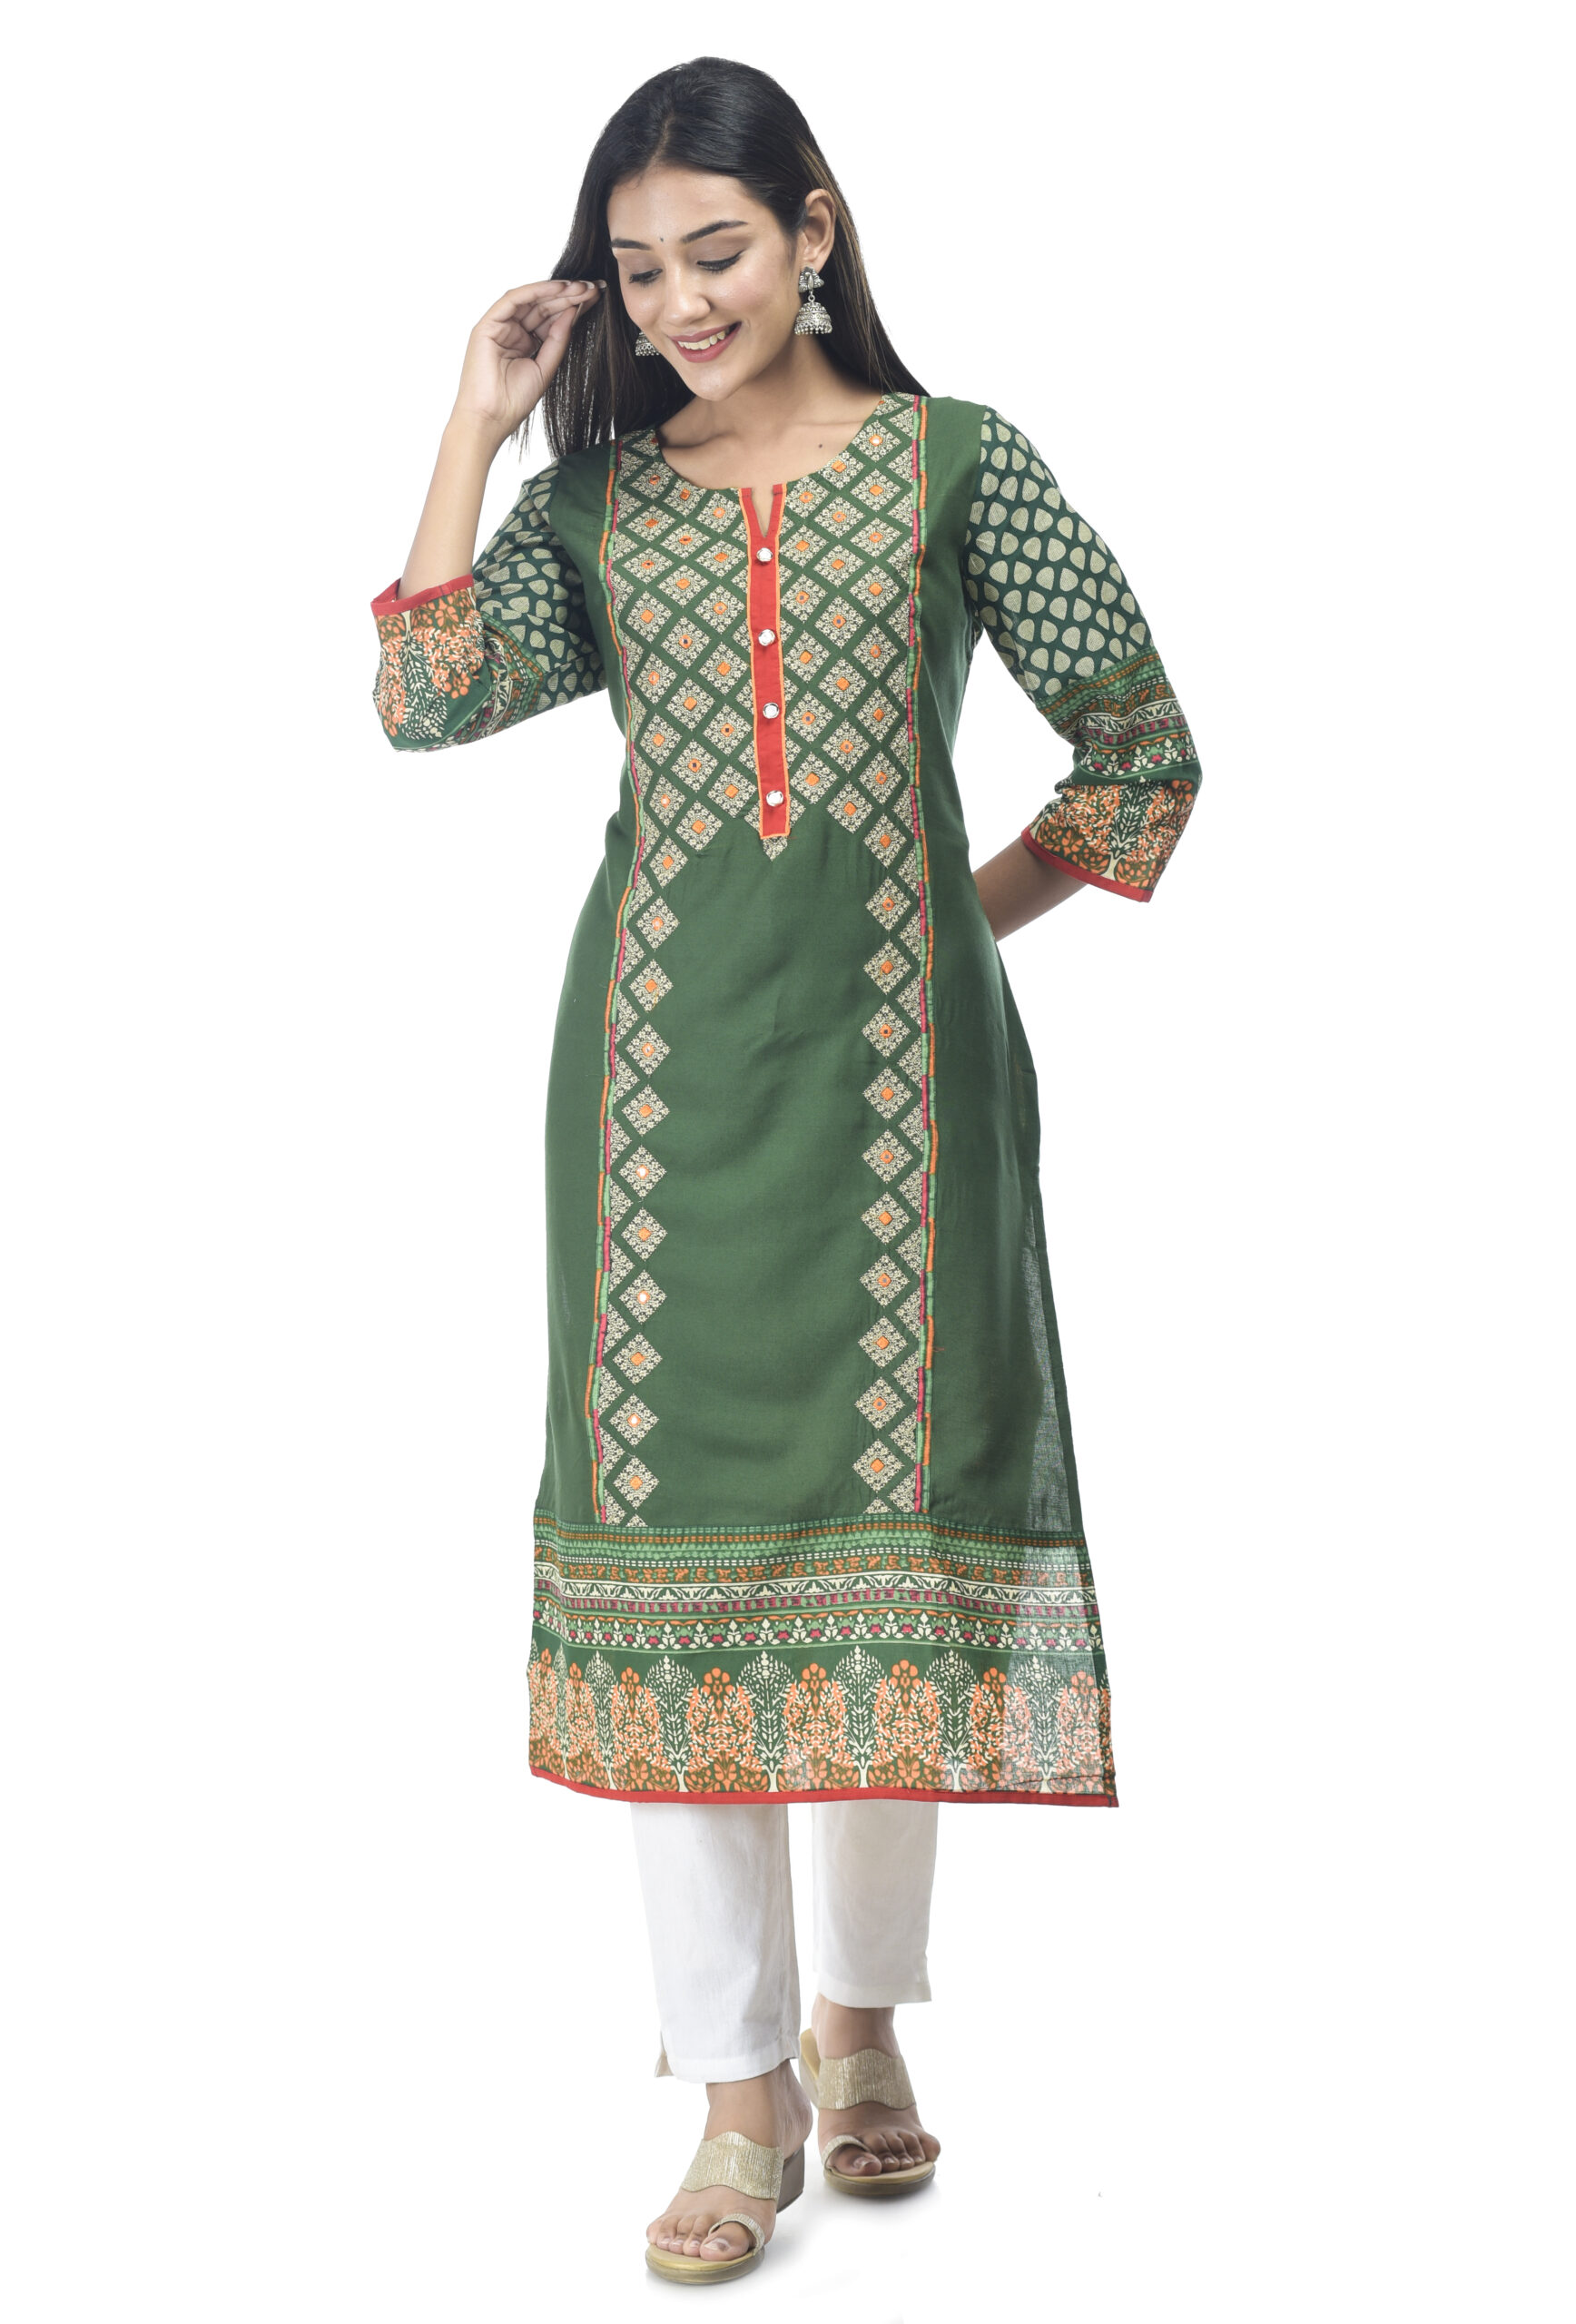 Jaipur Kurti Women Fit and Flare Blue Dress - Buy Jaipur Kurti Women Fit  and Flare Blue Dress Online at Best Prices in India | Flipkart.com